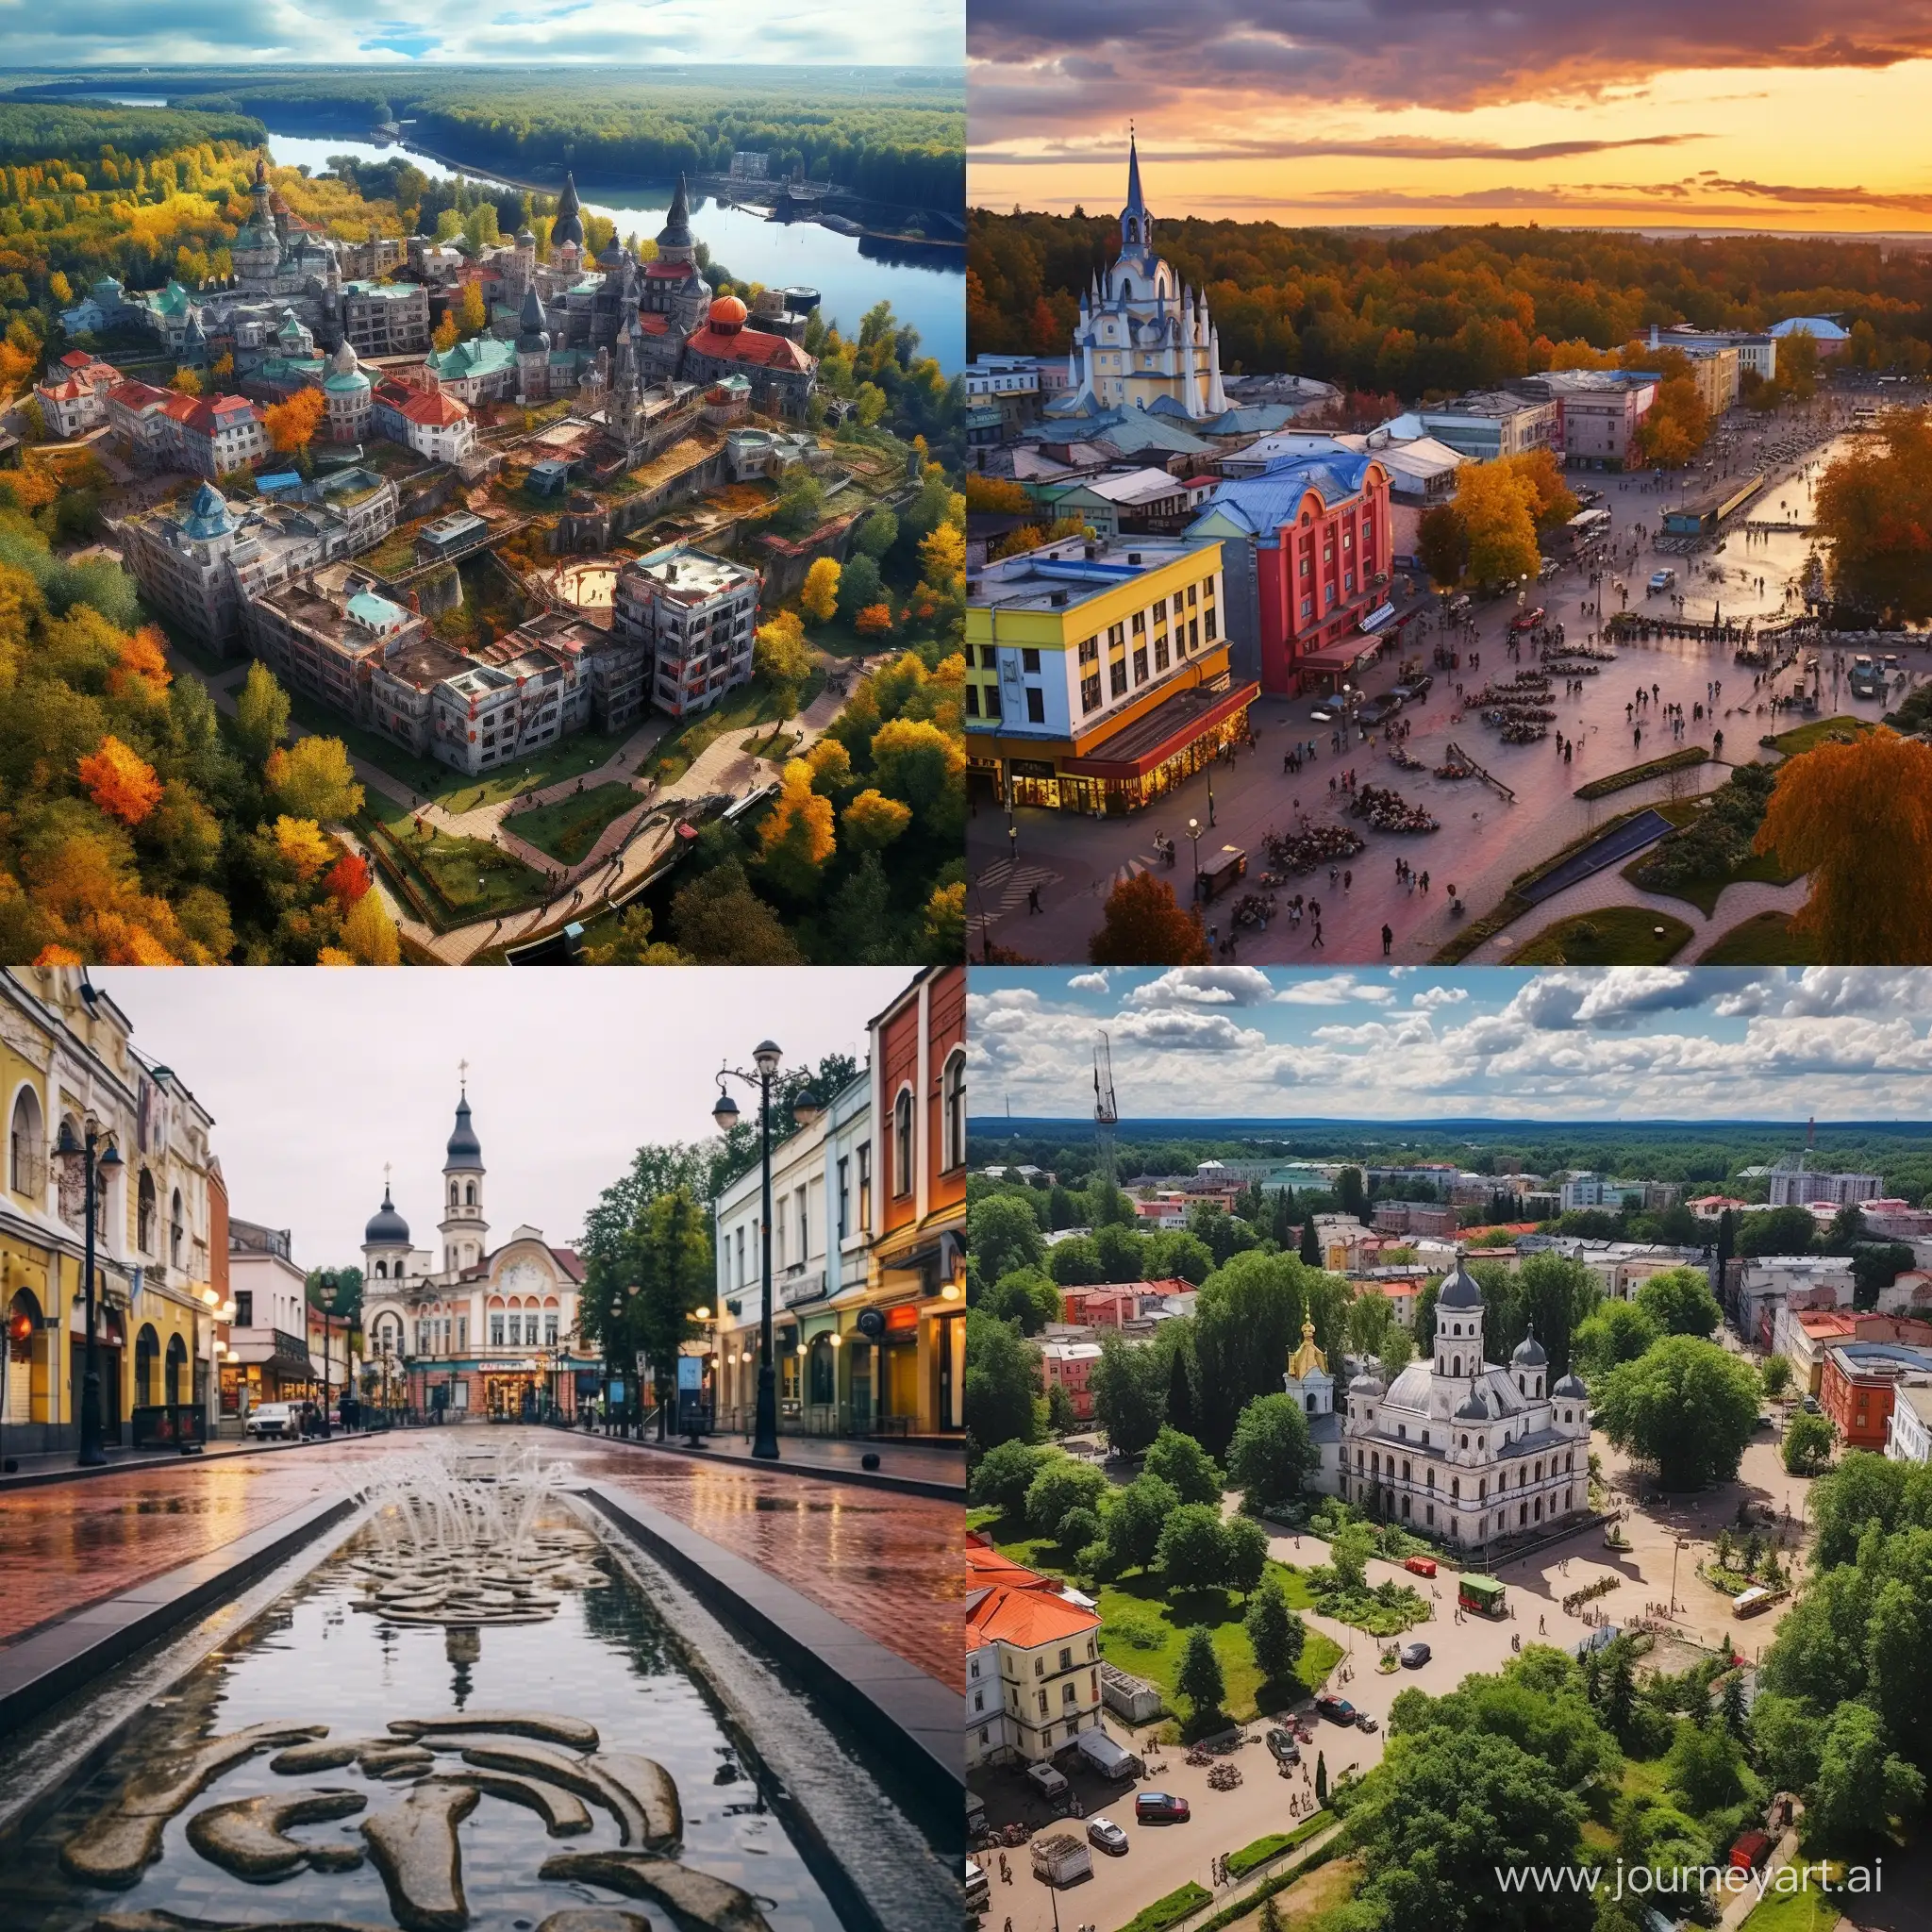 Charming-Kaluga-Russia-Exploring-the-Best-City-in-the-World-in-a-11-Aspect-Ratio